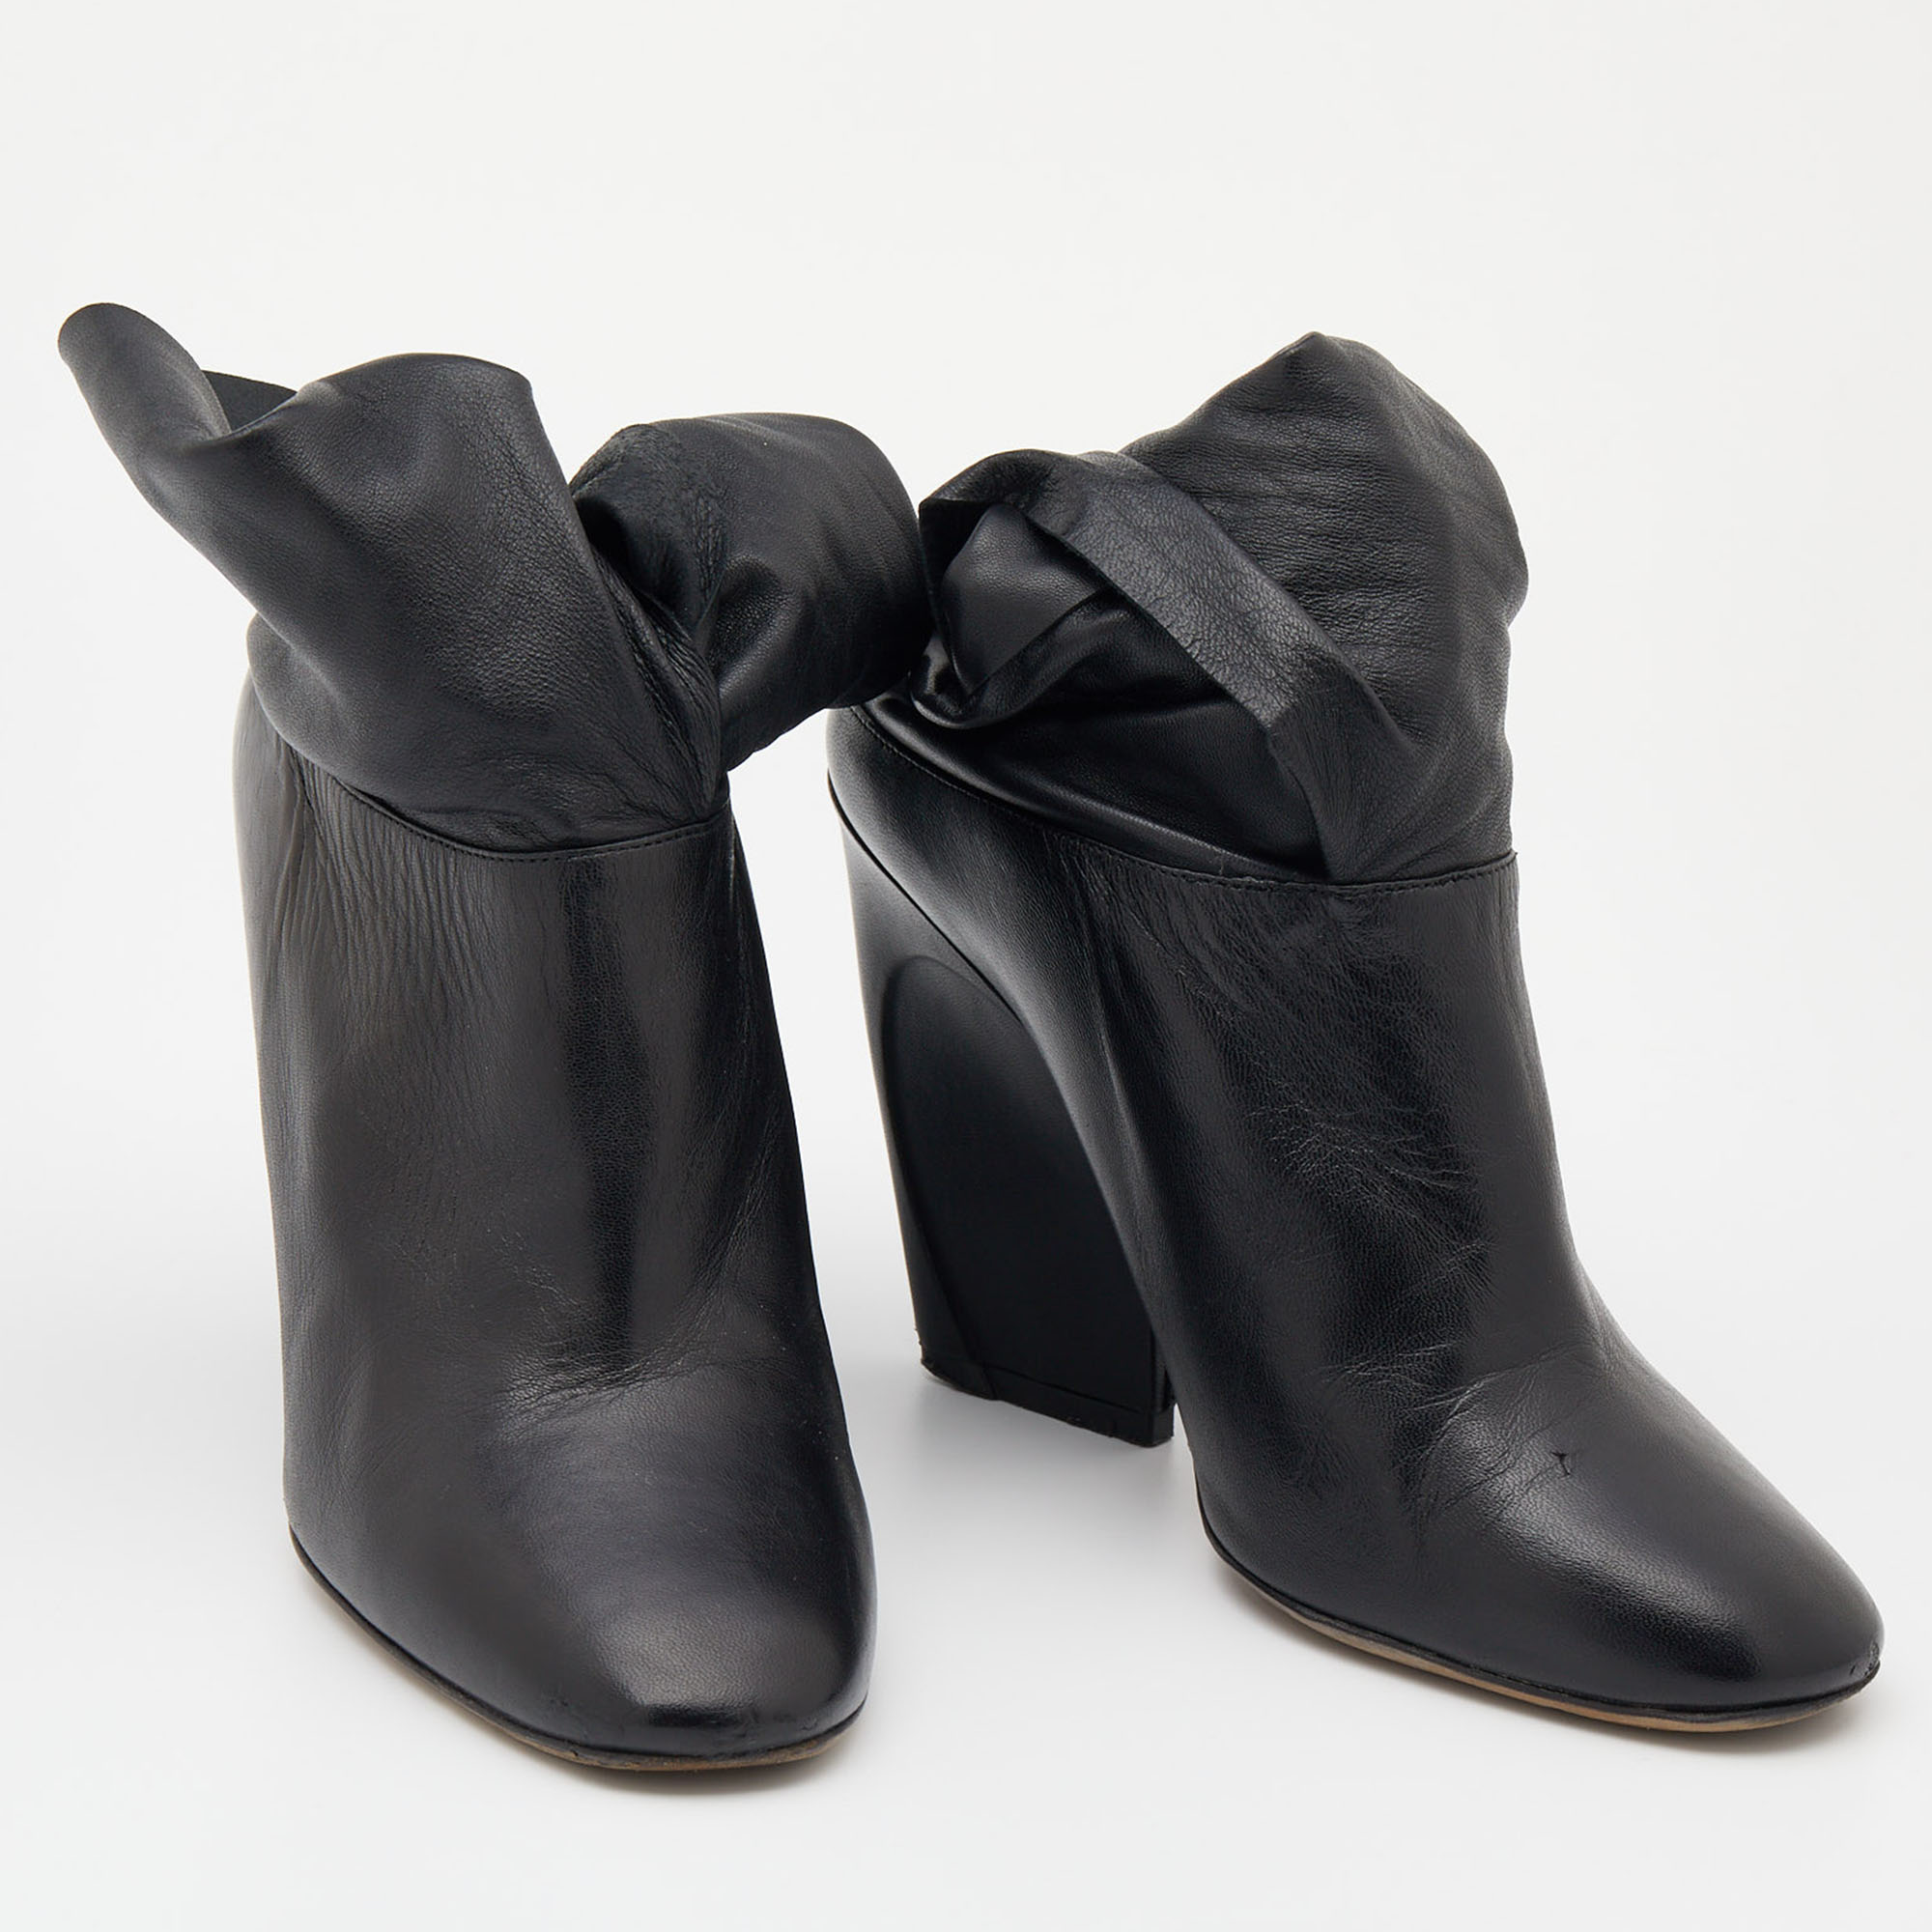 Dior Black Leather Wedge Ankle Wrap Booties Size 37